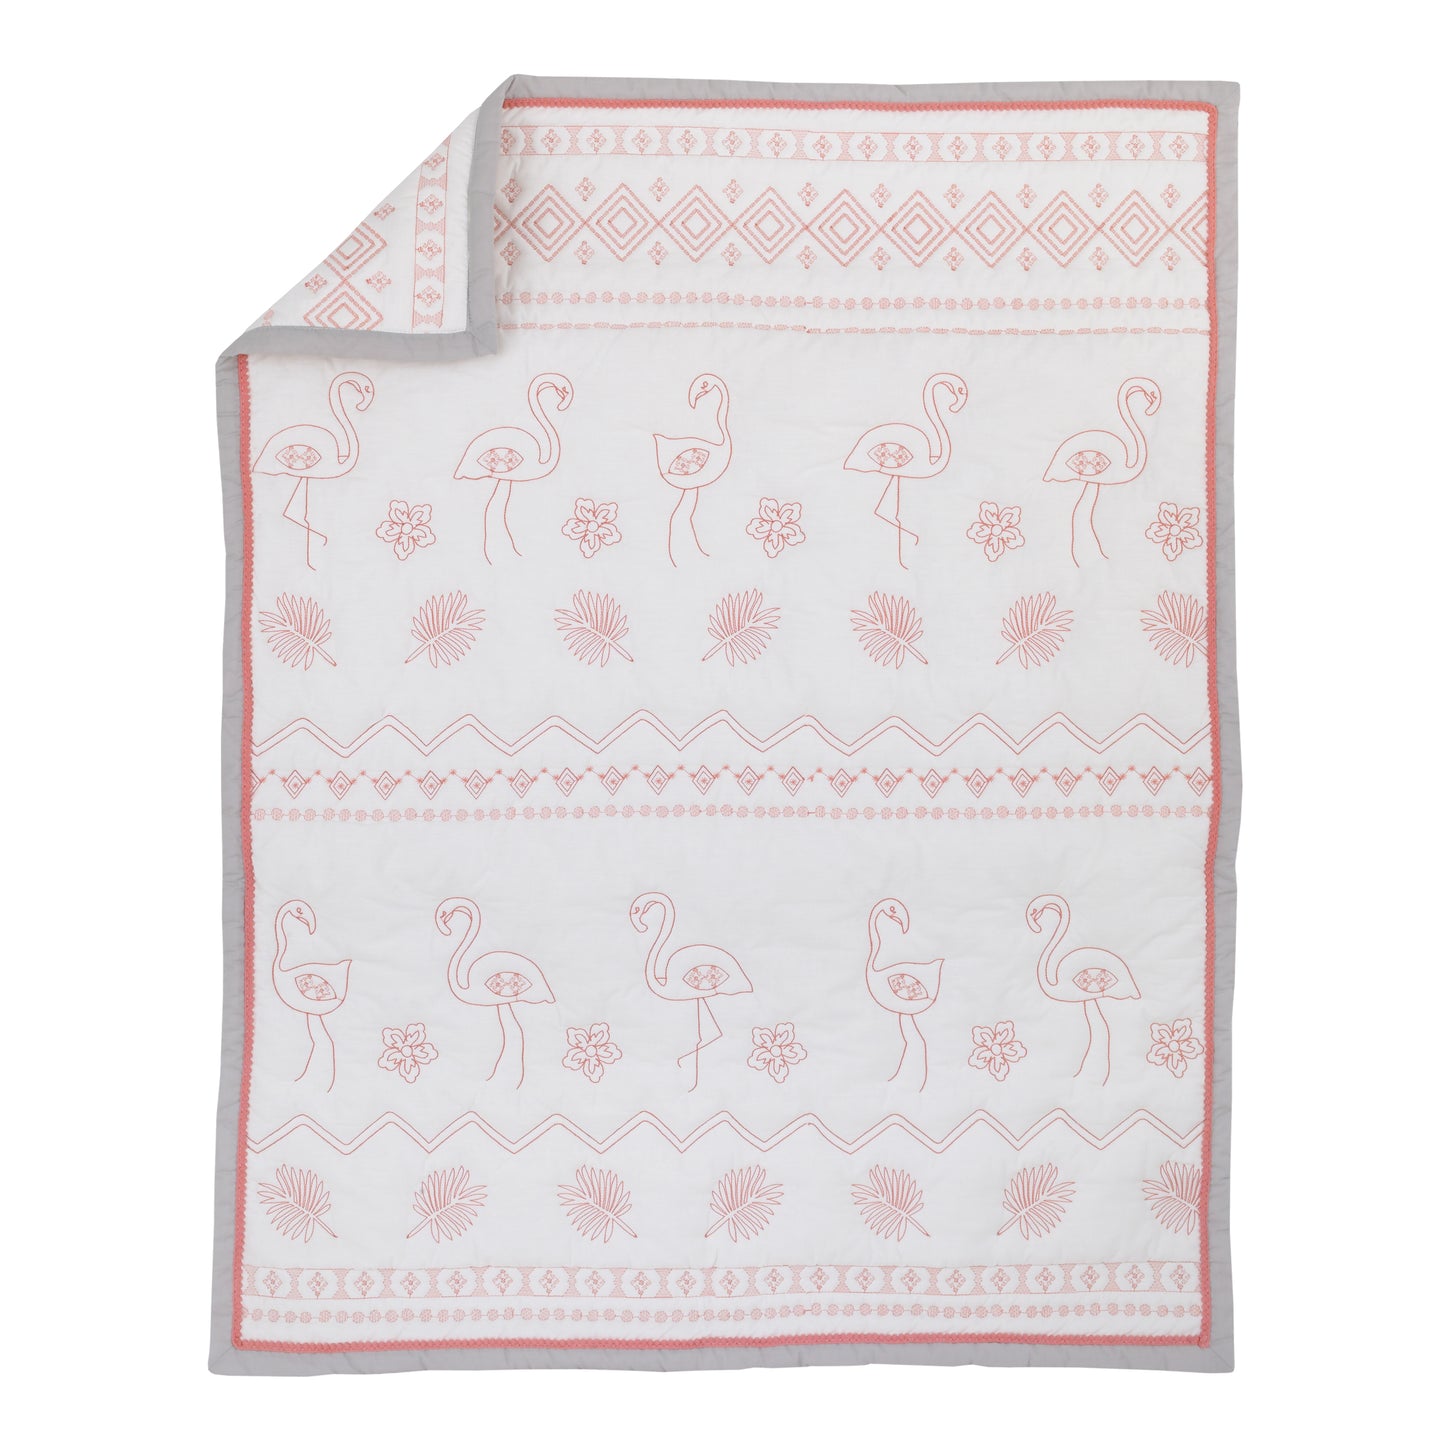 NoJo Tropical Flamingo Pink & White 100% Cotton 4 Piece Nursery Crib Bedding Set - Embroidered Quilt, Fitted Sheet, Dust Ruffle, and Diaper Stacker